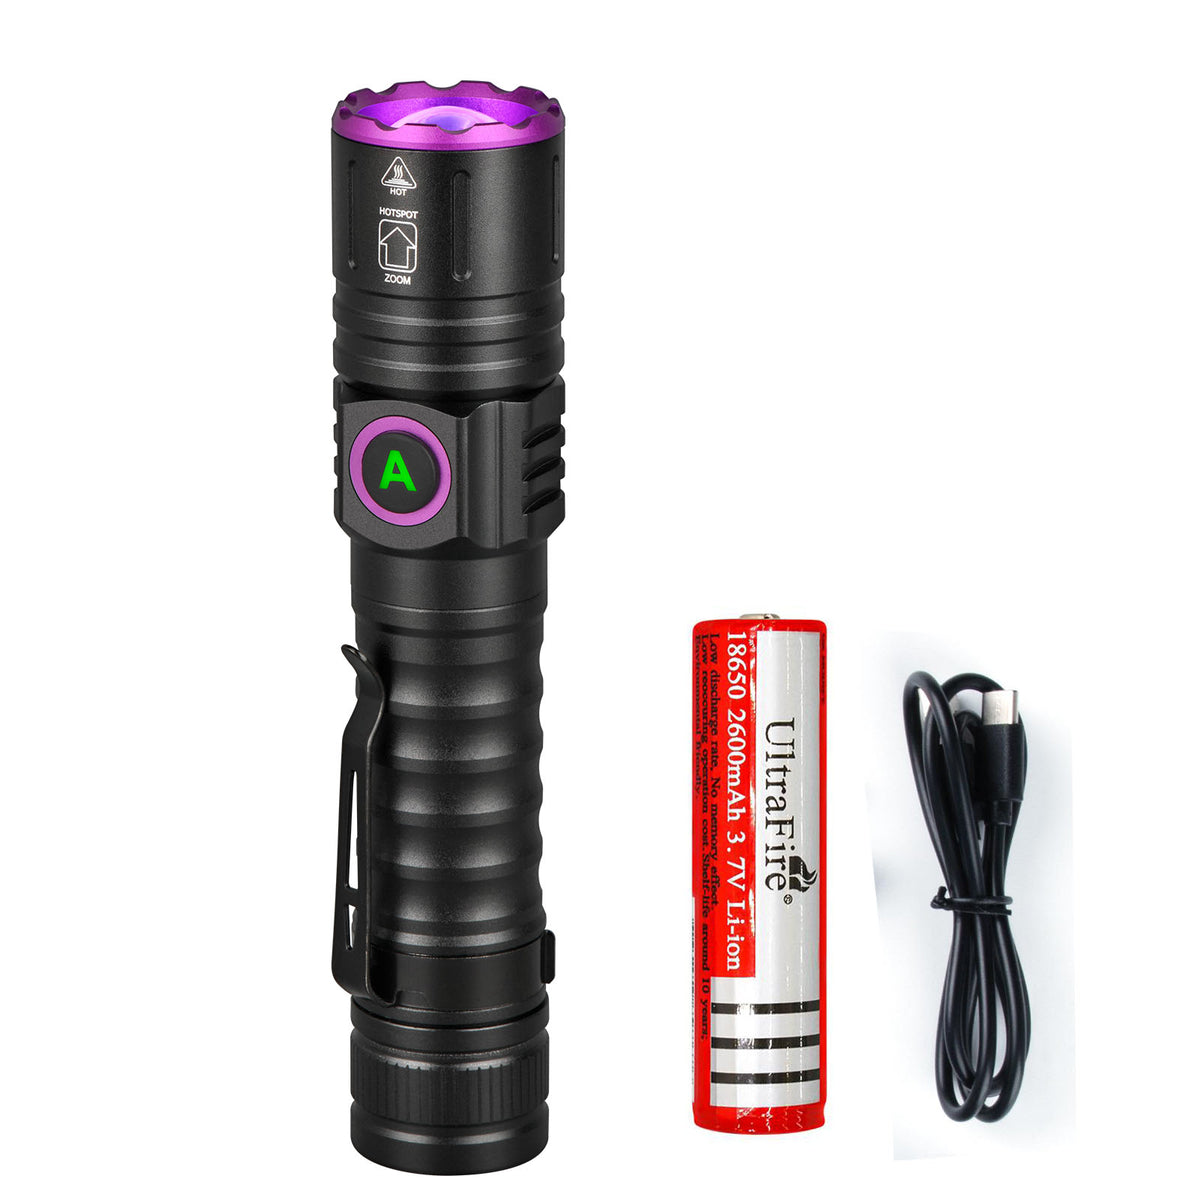 UltraFire UV Small LED Light Type-C Rechargeable SP69